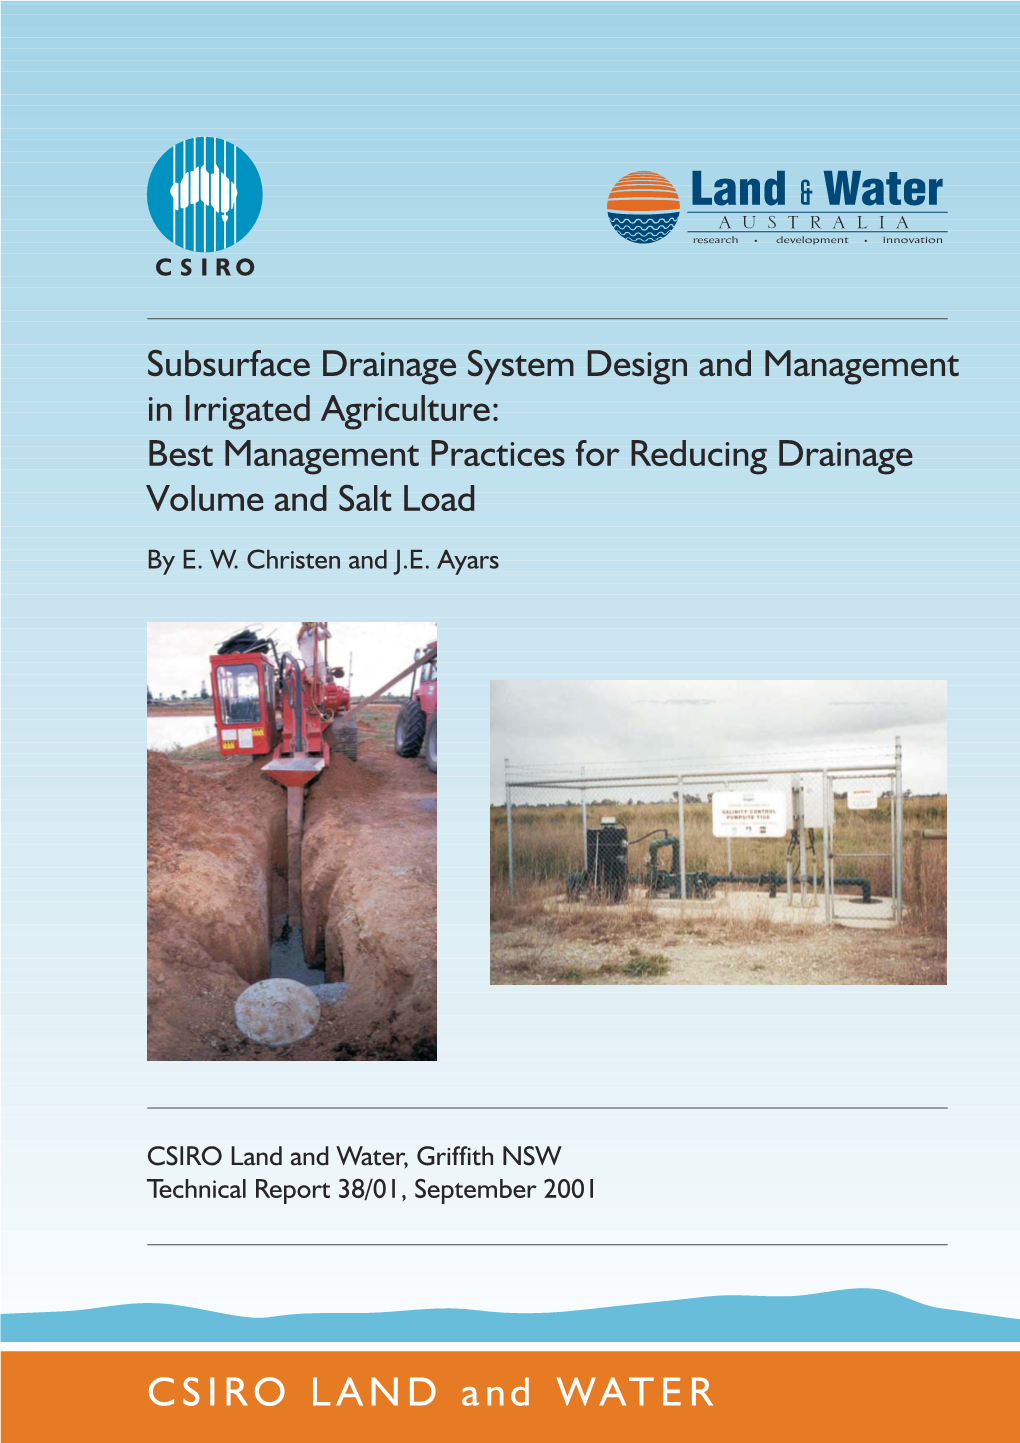 Subsurface Drainage Systems Design and Management in Irrigated